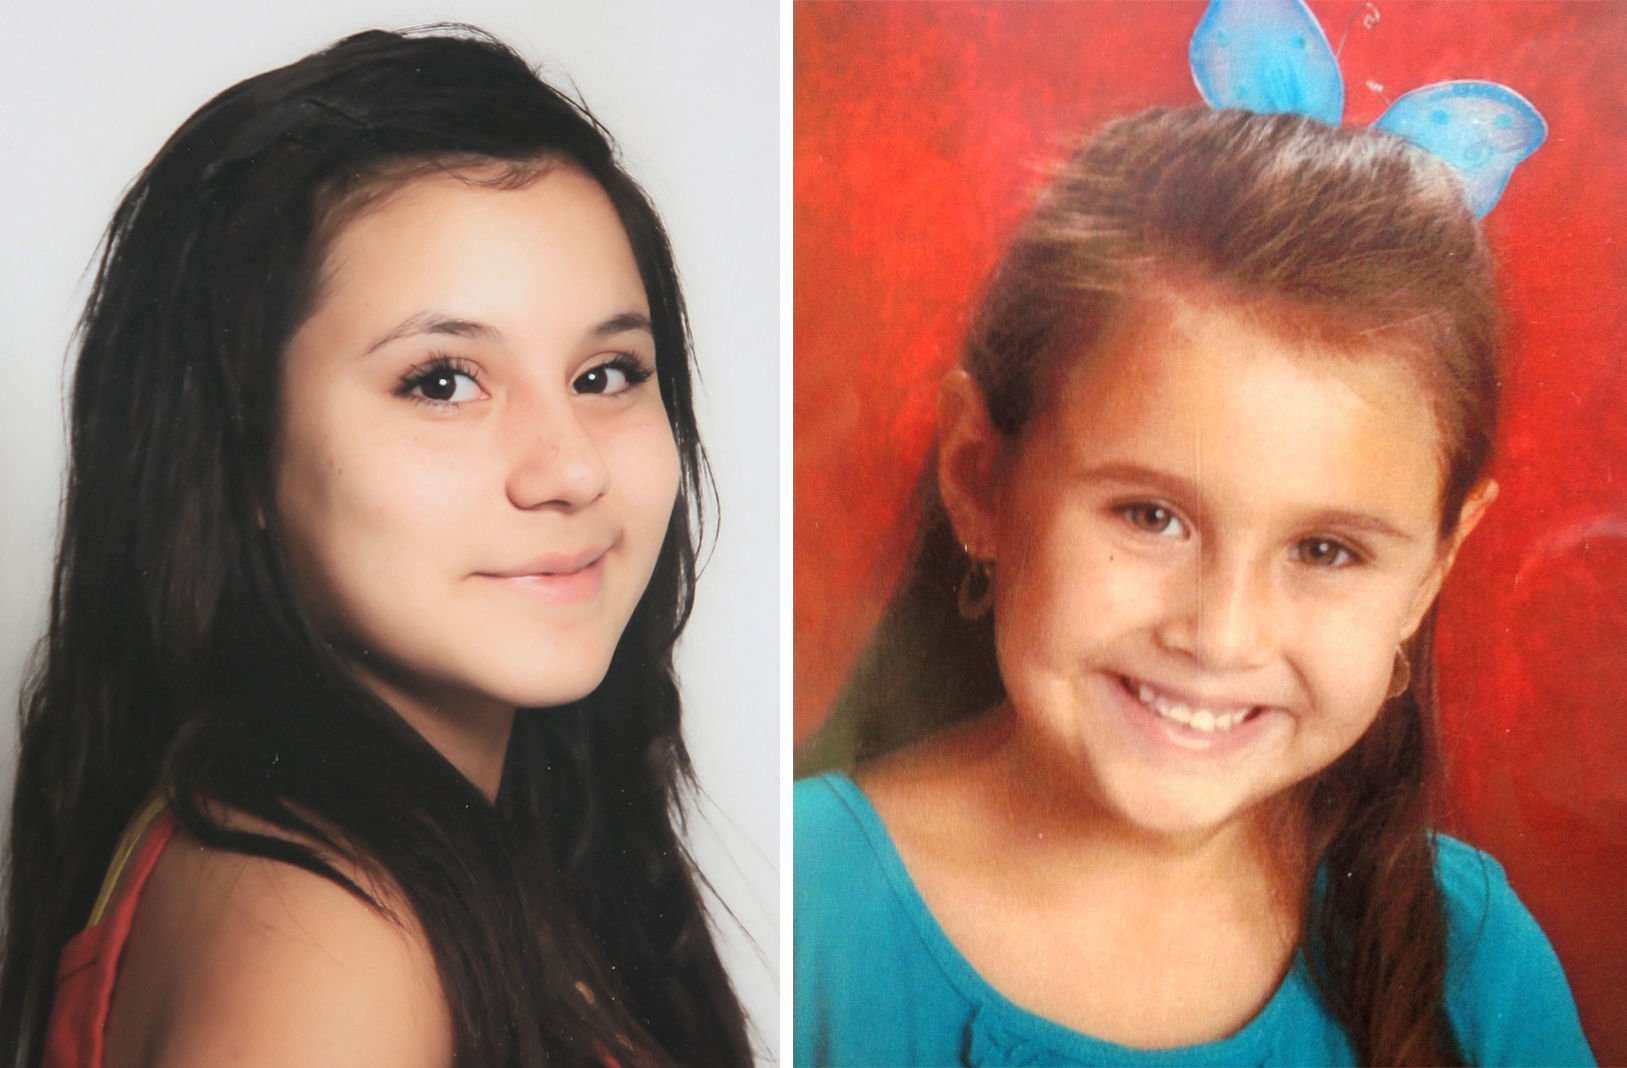 Trial begins Tuesday for man accused of killing 2 Tucson girls